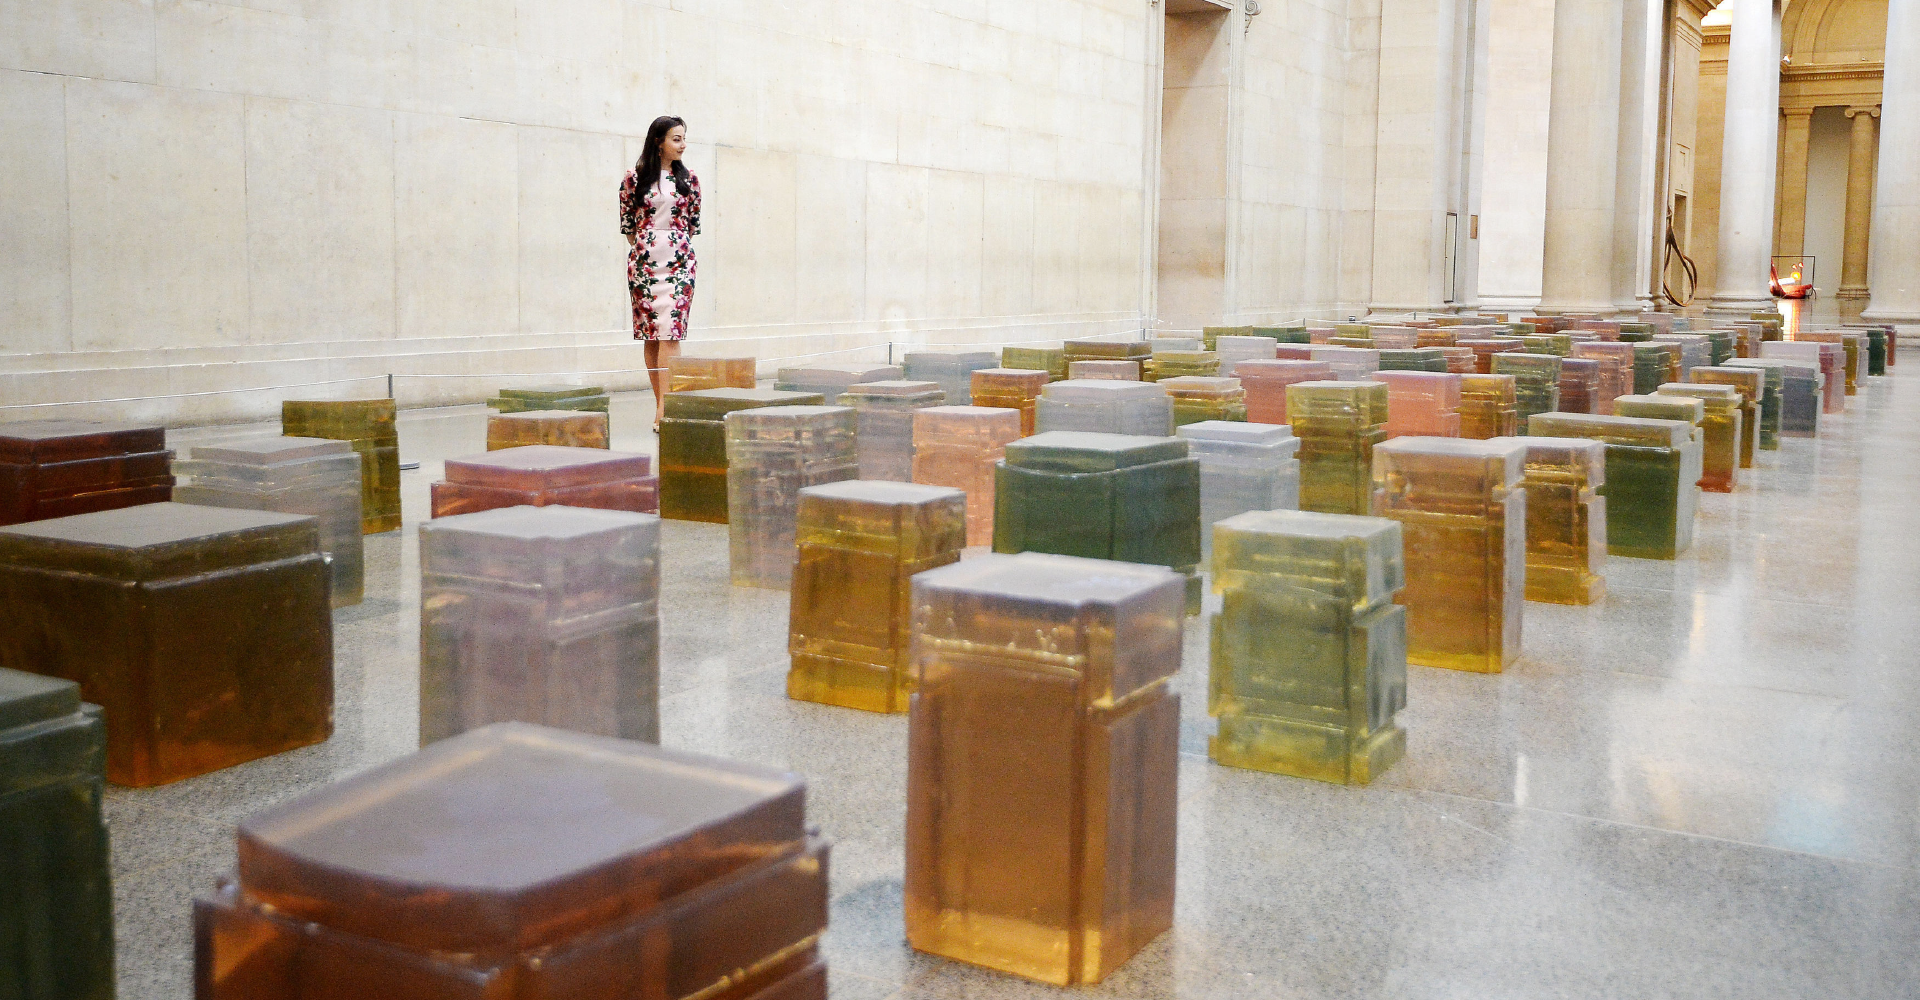 Rachel Whiteread at Tate Britain. Exposing the invisible. | by Craig Berry  | Medium